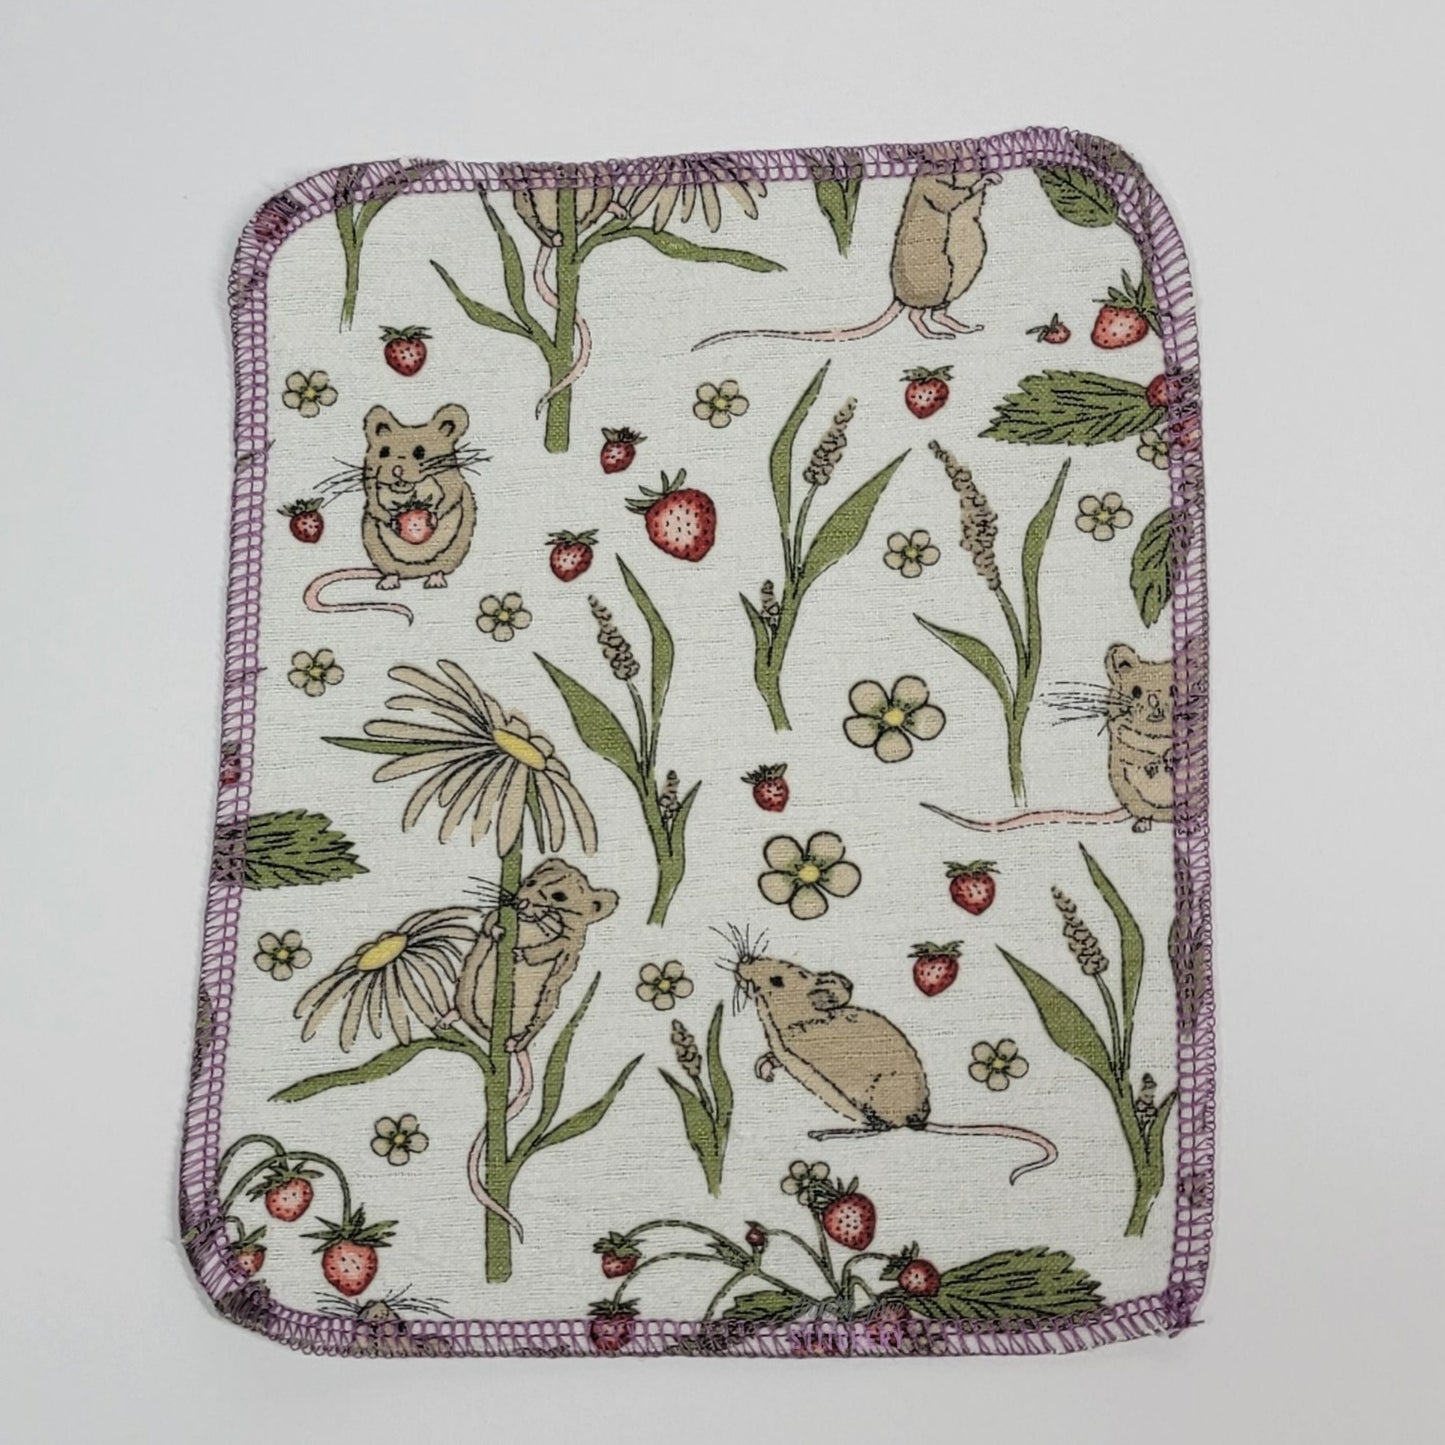 The front of one mouse print cloth wipe. It is a rounded rectangular shape with lilac purple stitching around the edges.